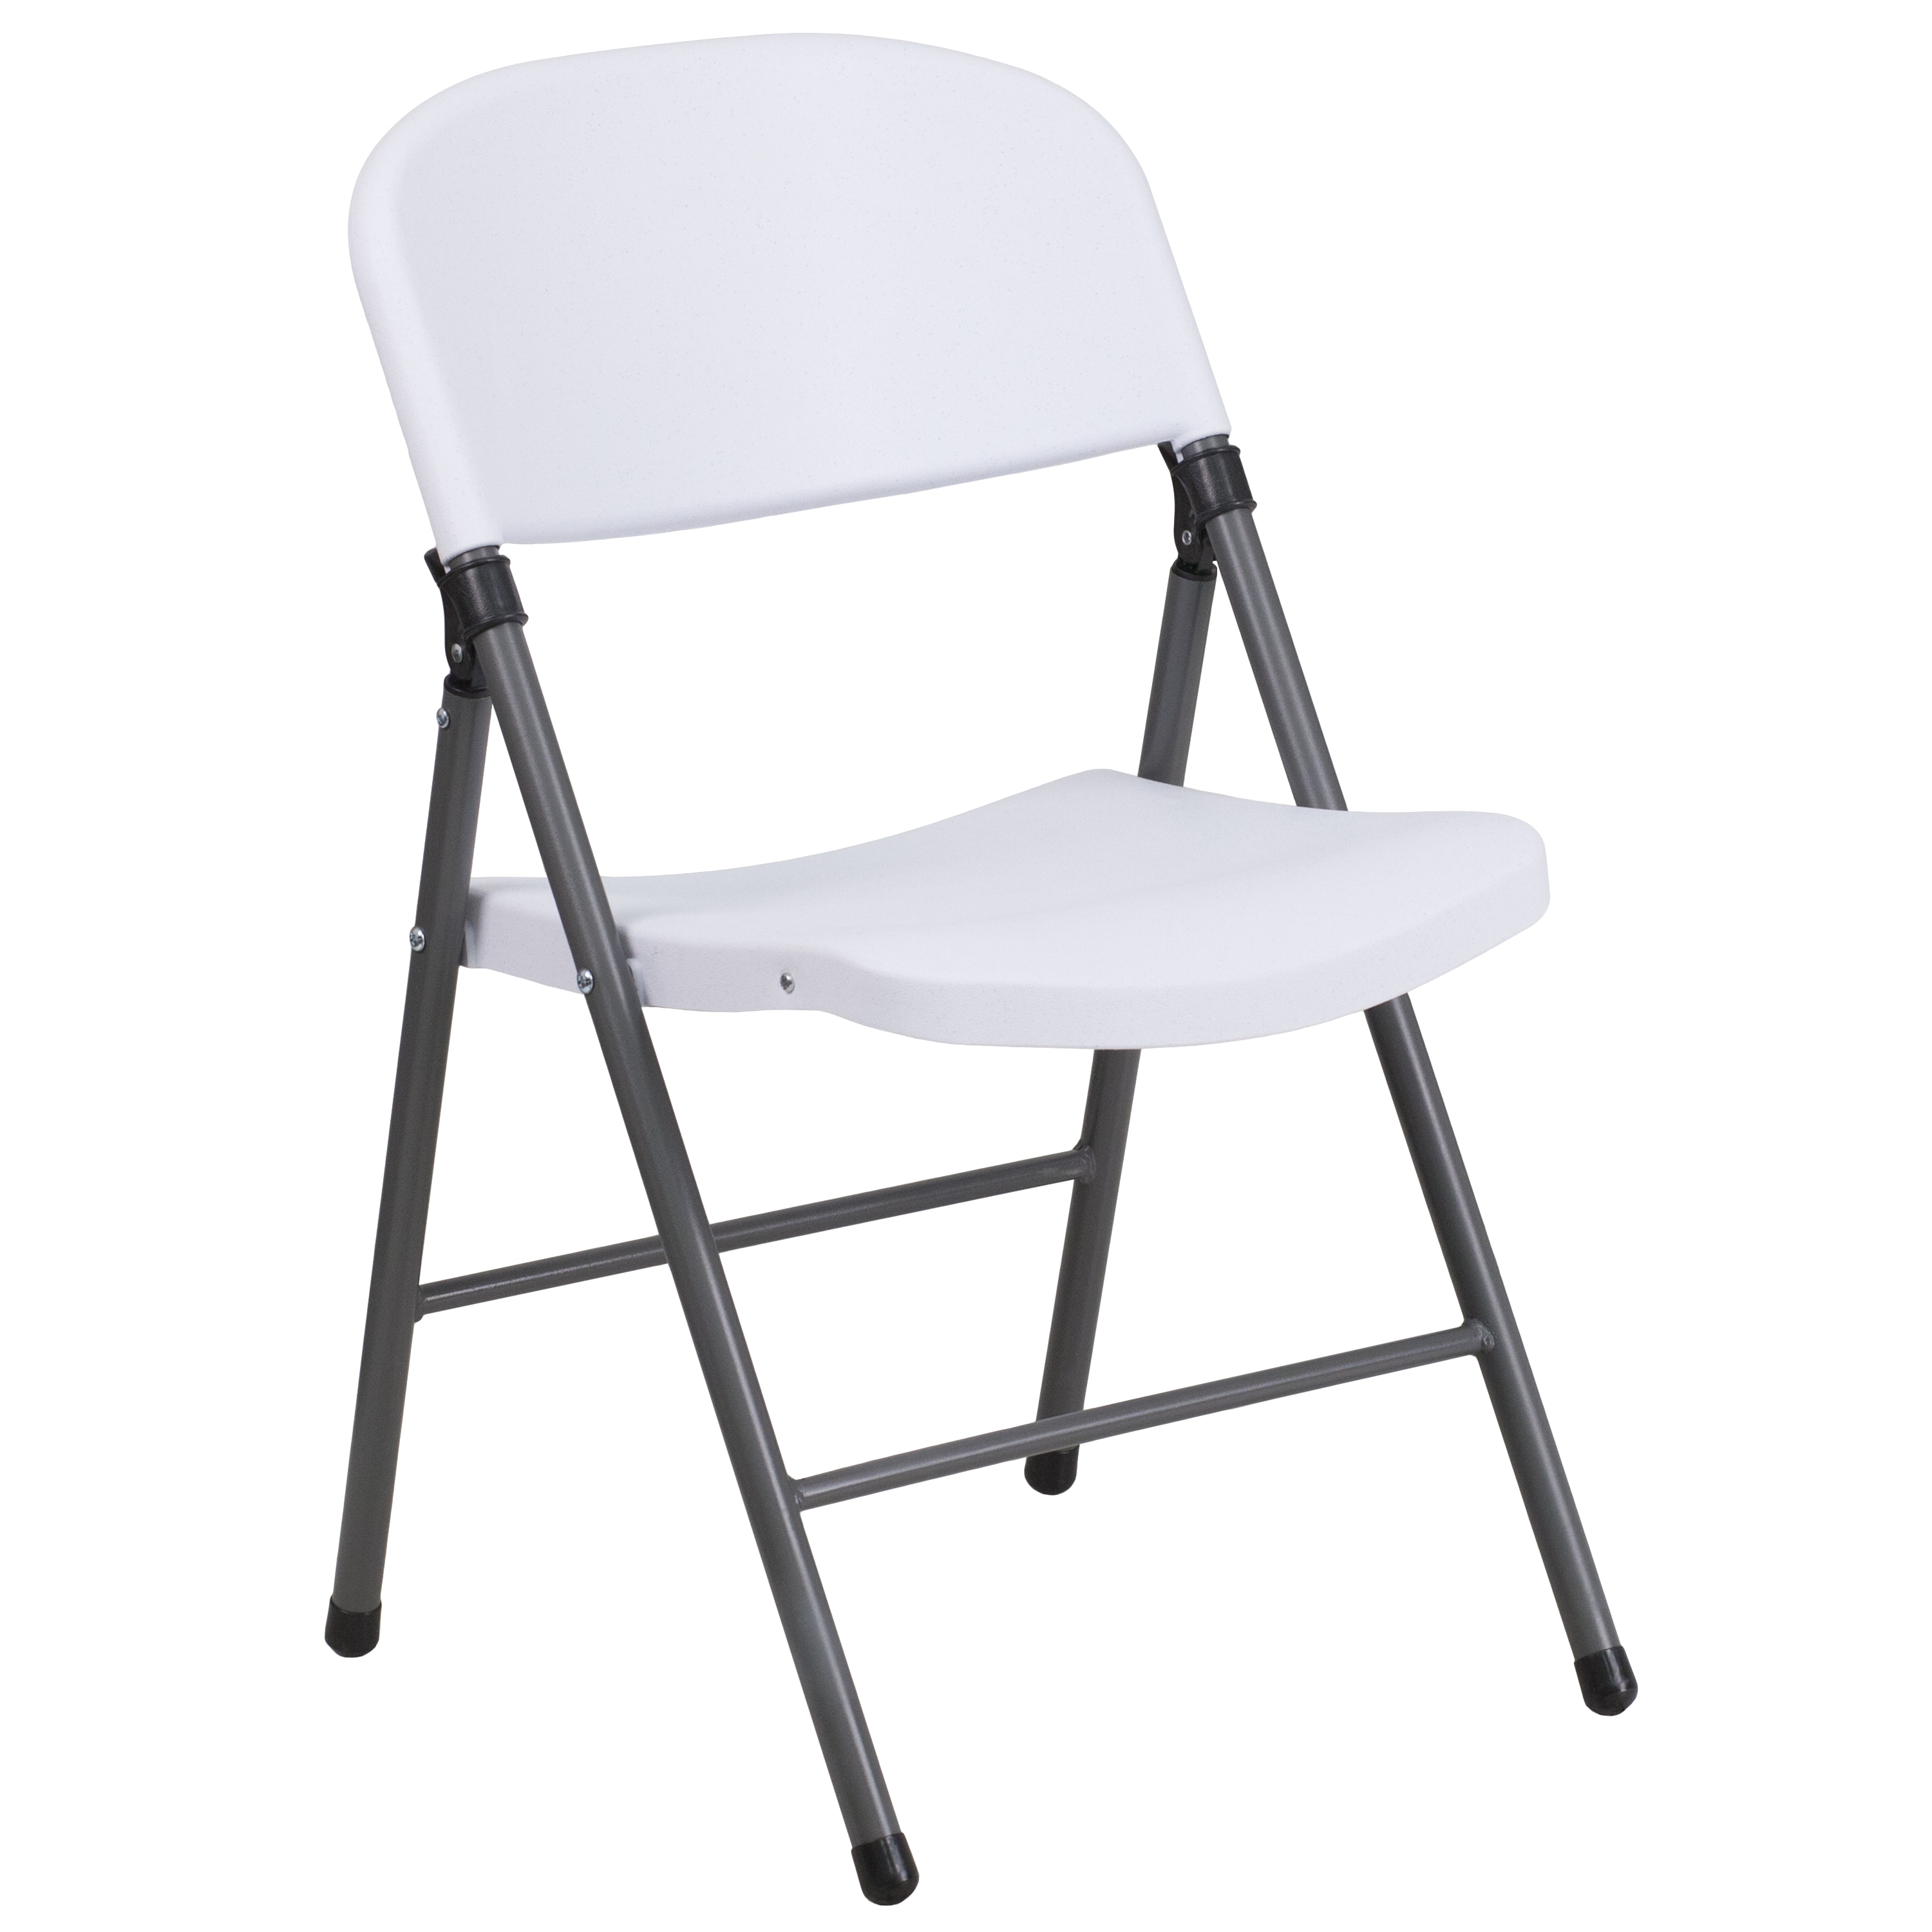 NEW Indoor Outdoor PLASTIC Folding Chairs Metal Frame BEST QWALITY GREY 